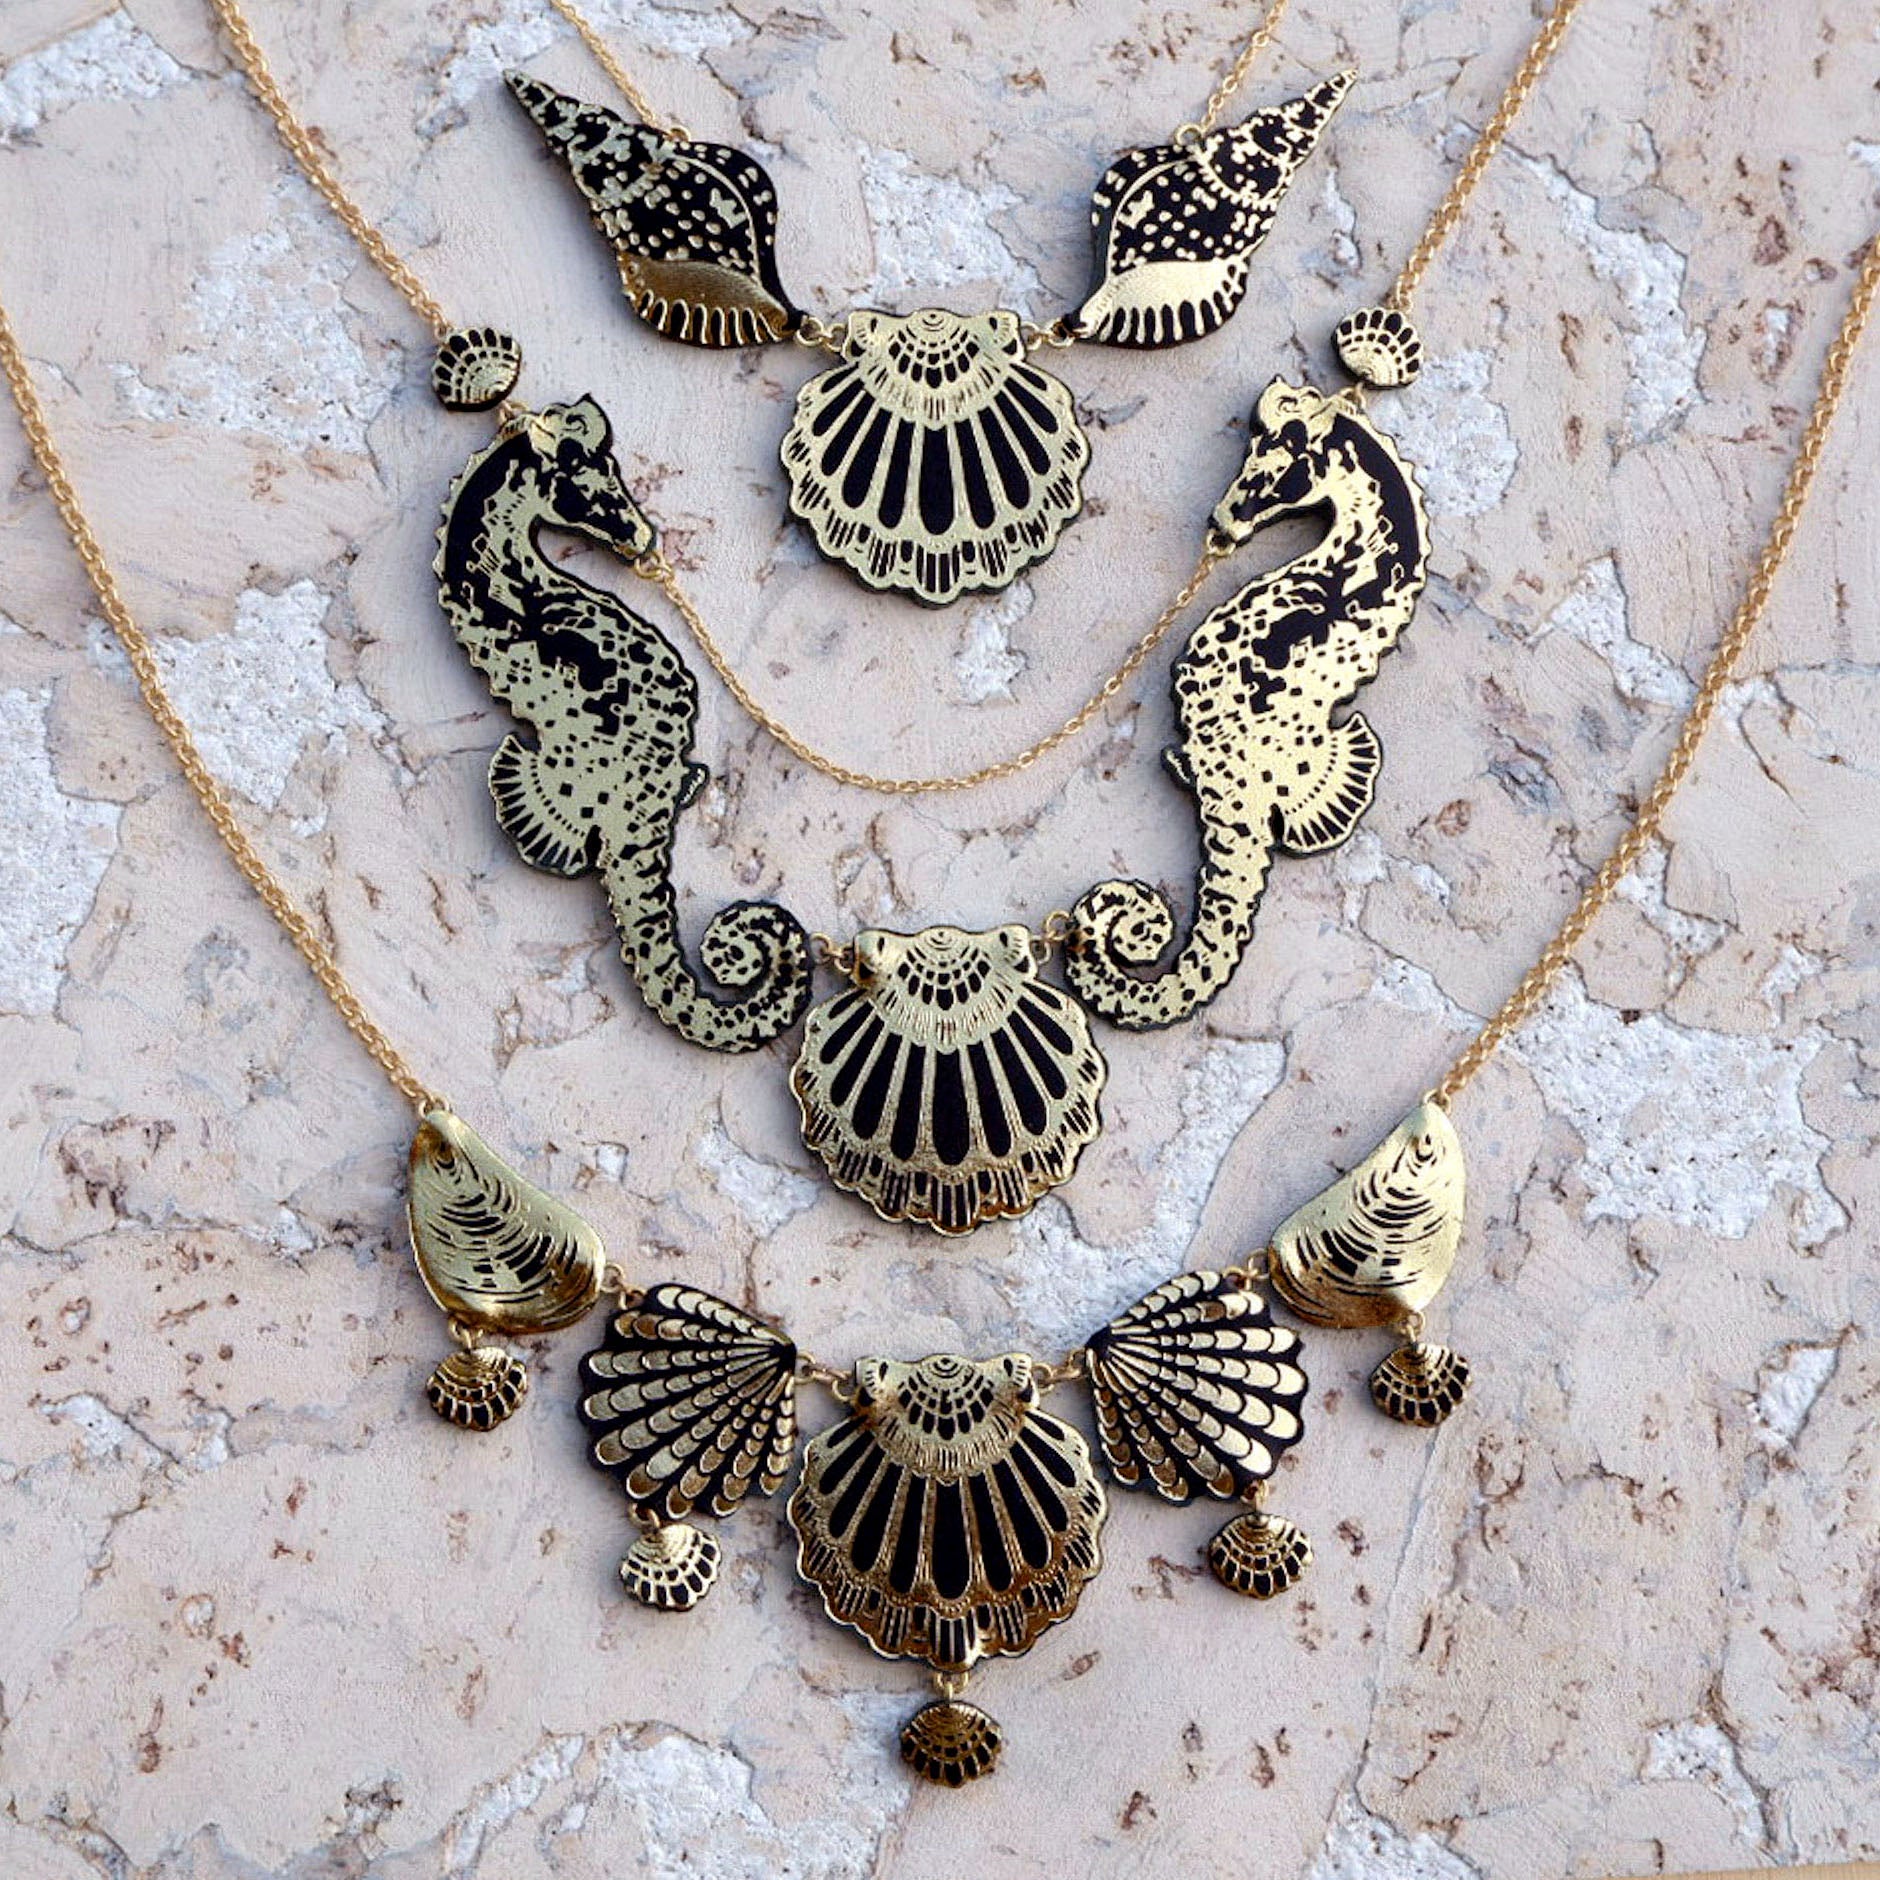 3 black & gold leather necklace featuring a selection of sea shells & seahorses